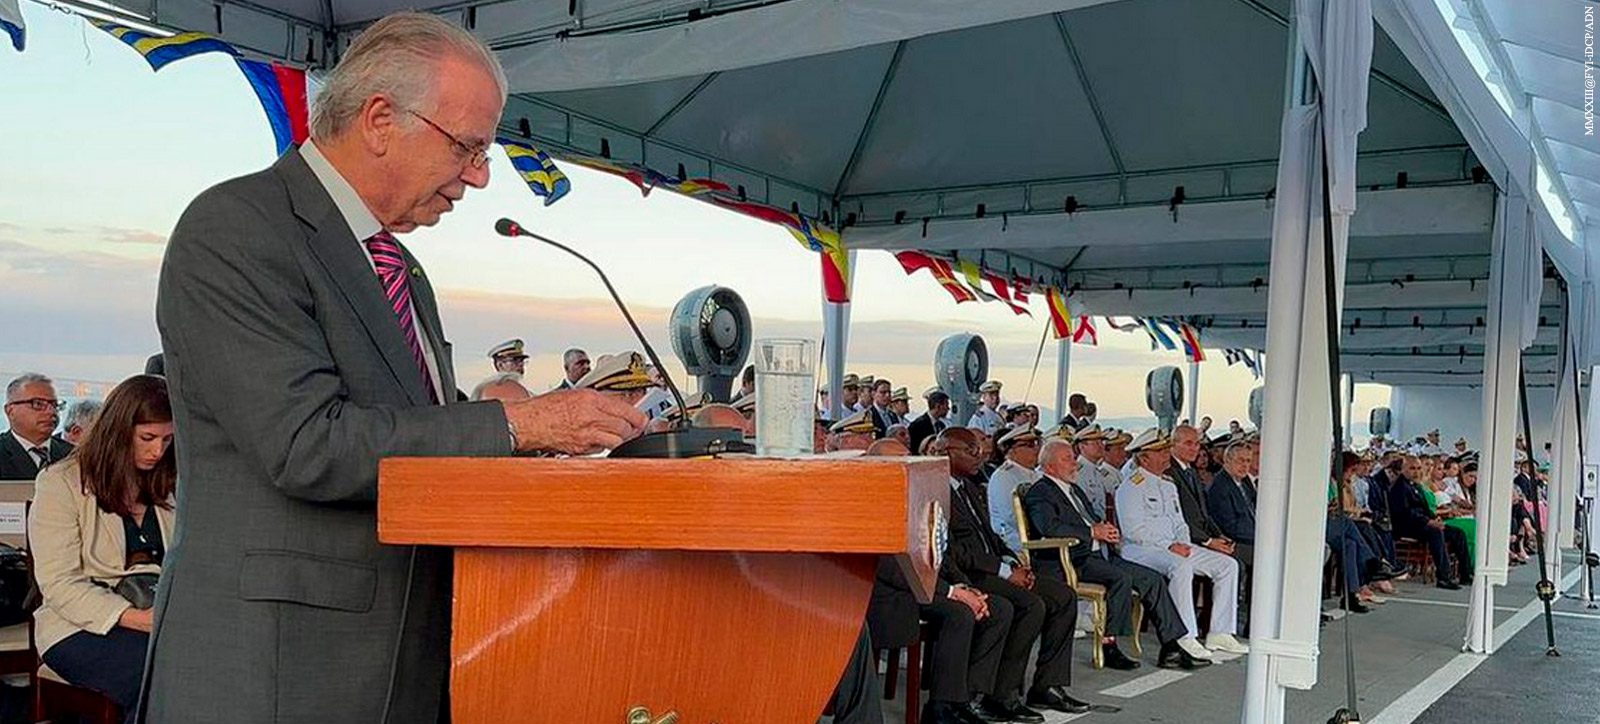 Brazilian President and Defense Minister attend Sailor's Day ceremony